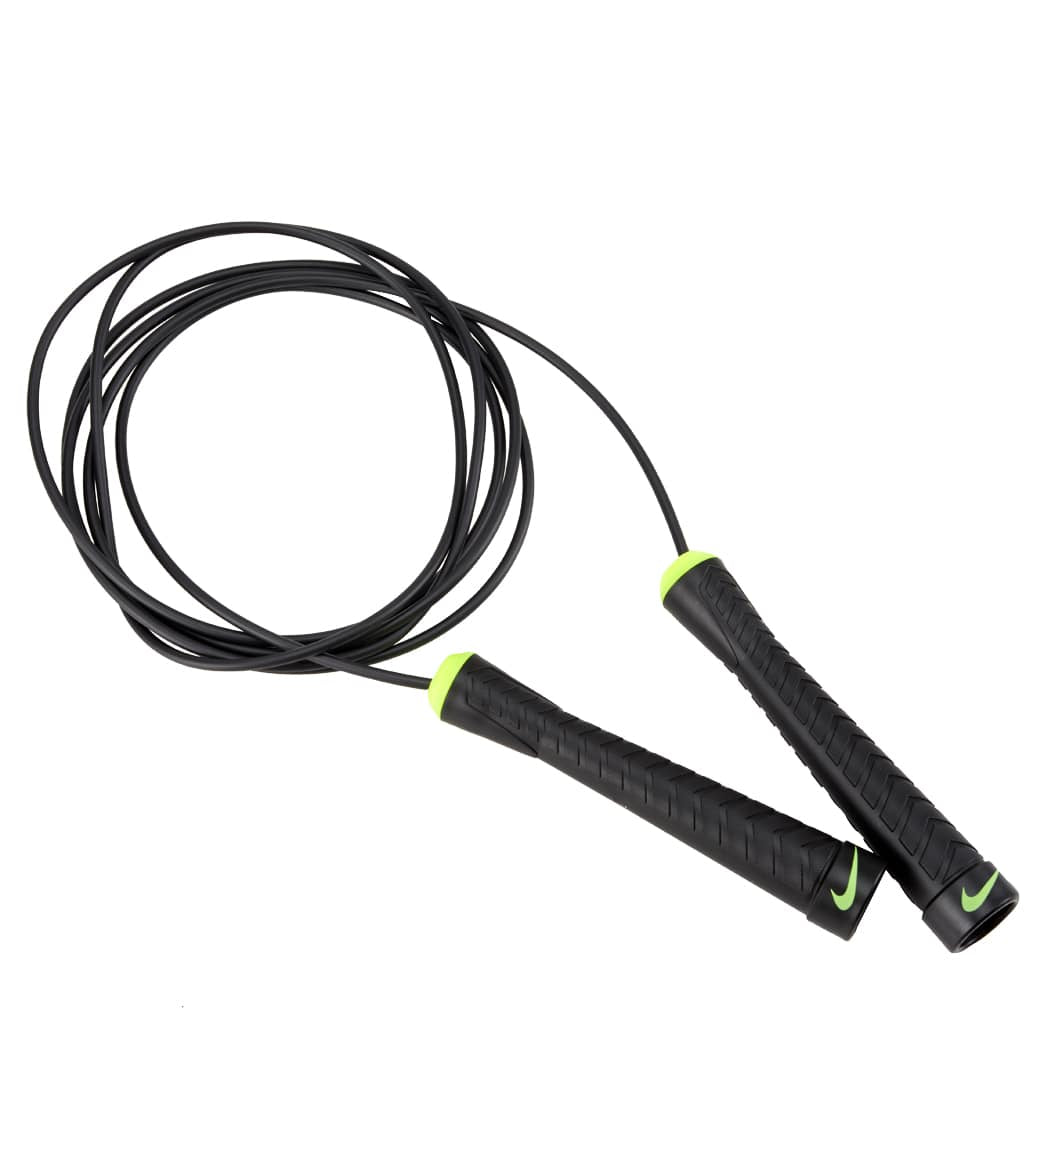 Nike Speed Rope at SwimOutlet.com